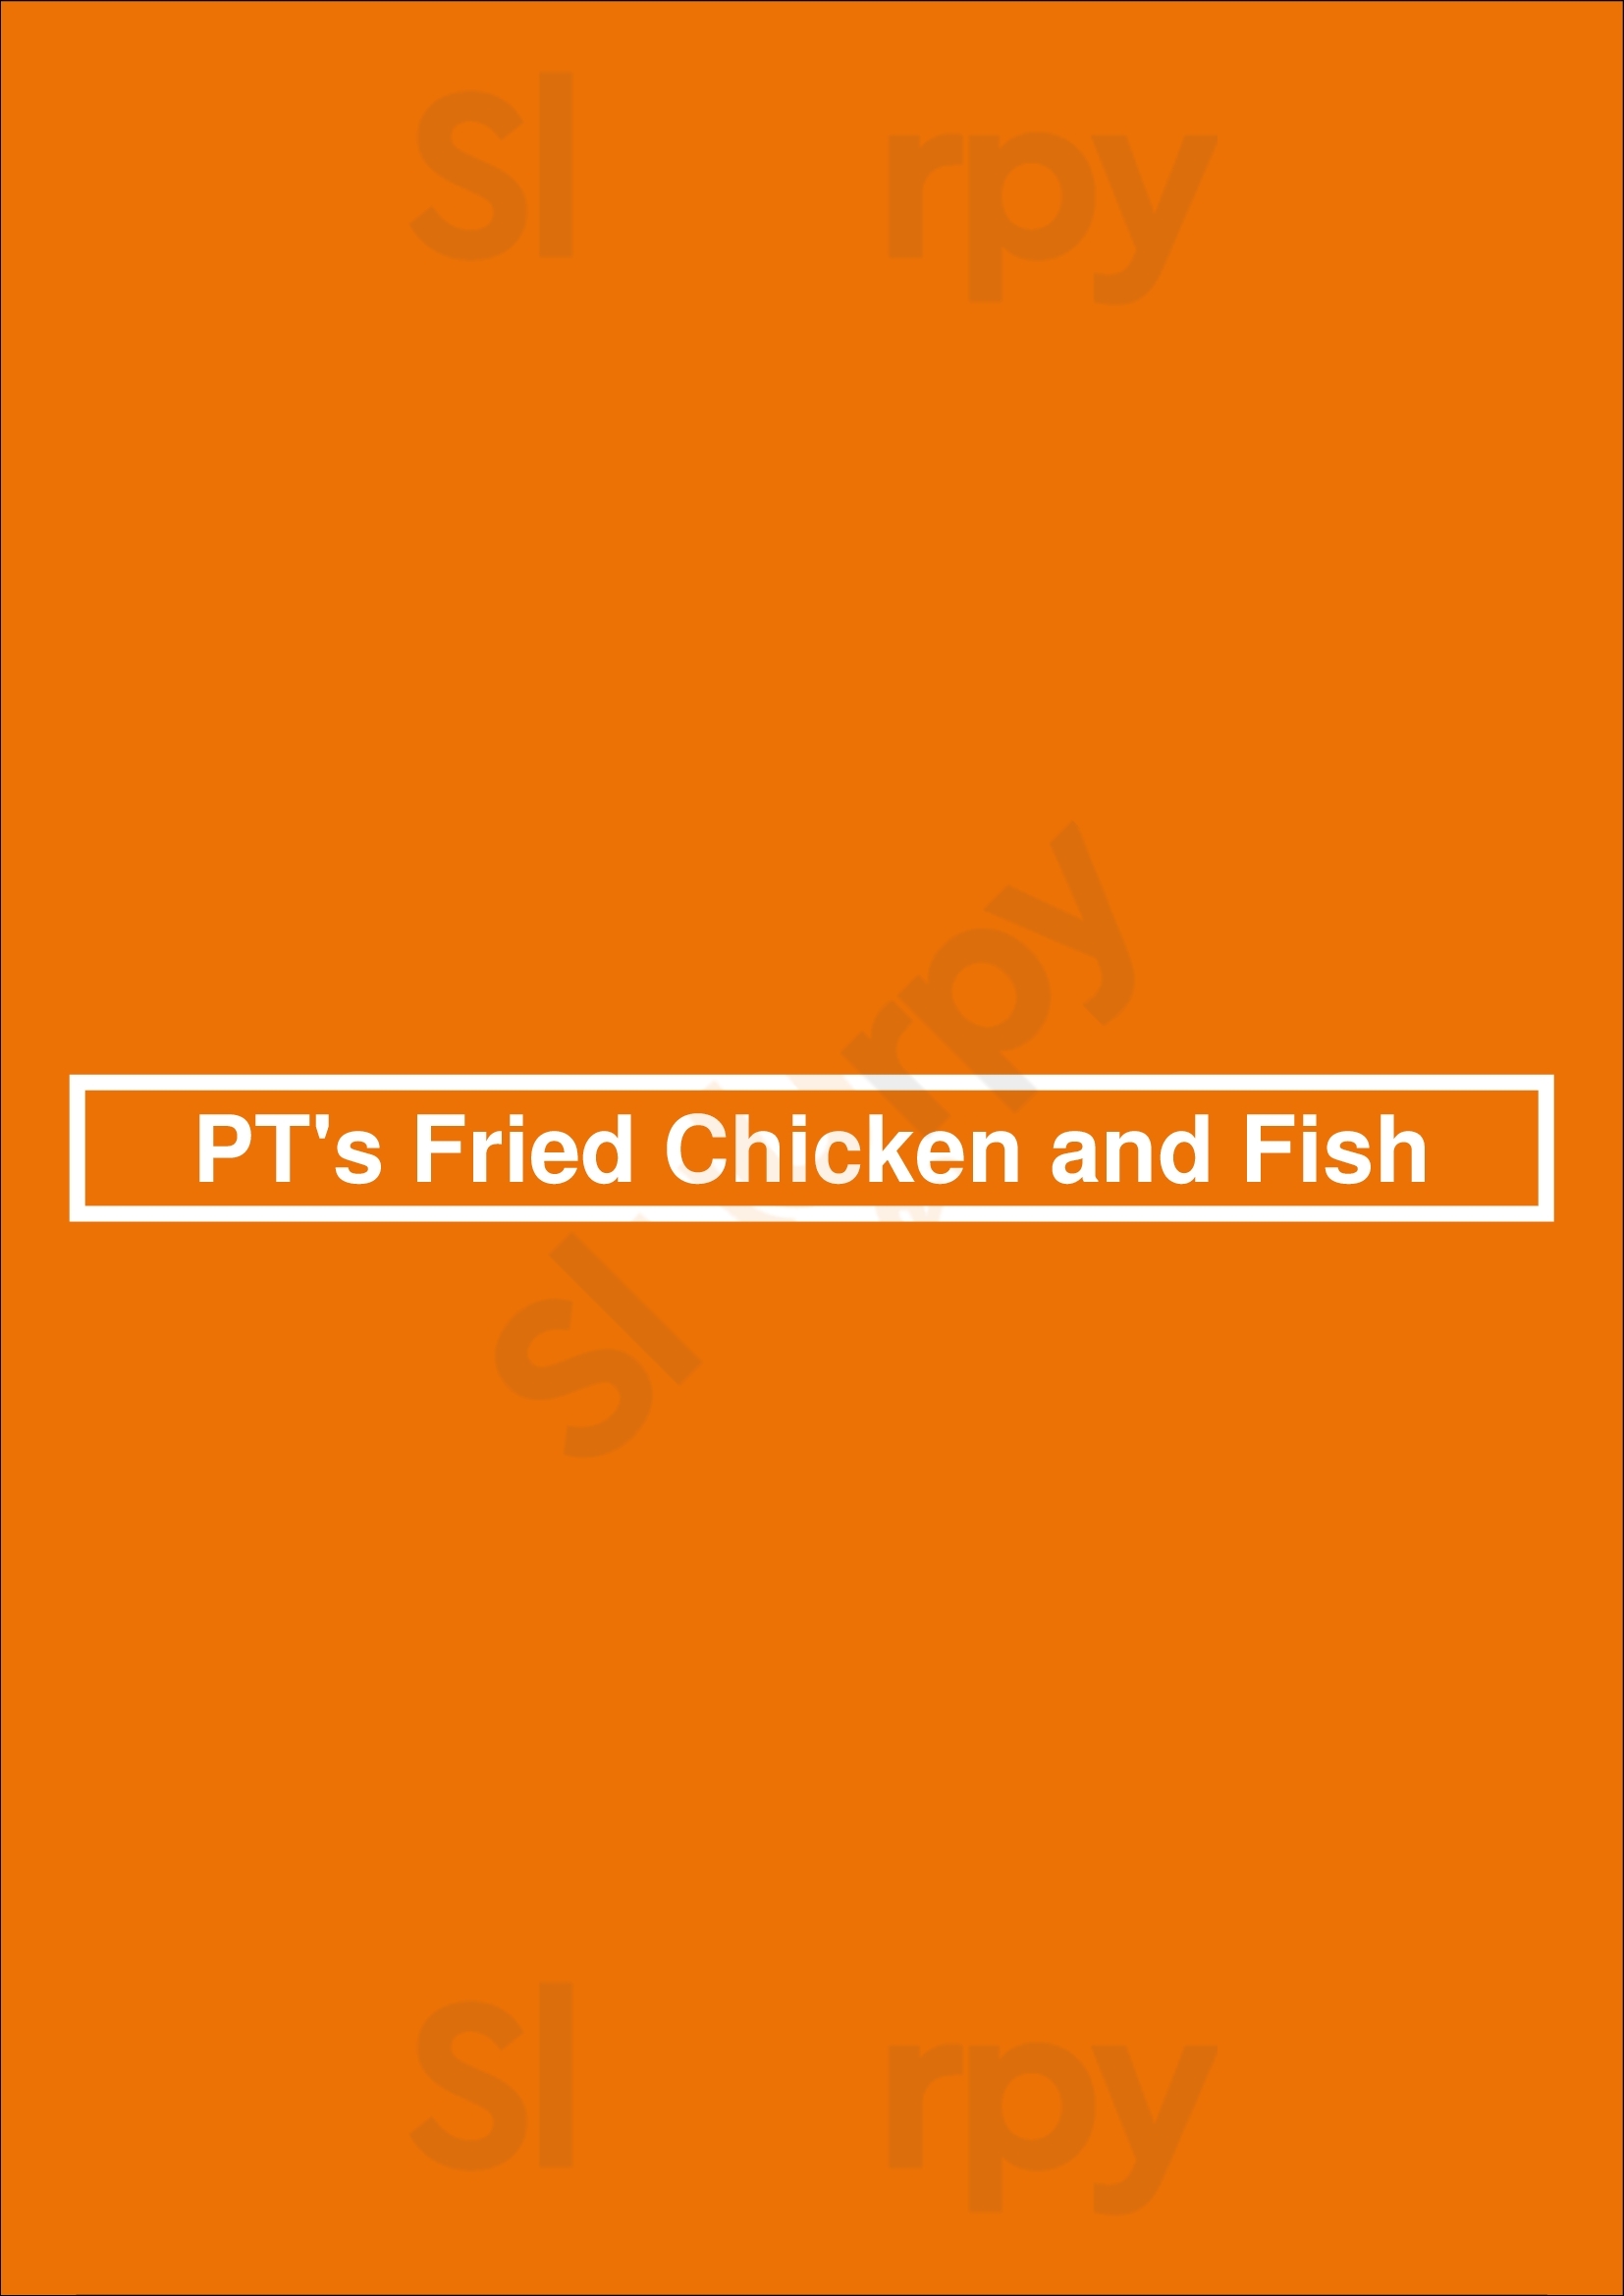 Pt's Fried Chicken And Fish Dallas Menu - 1